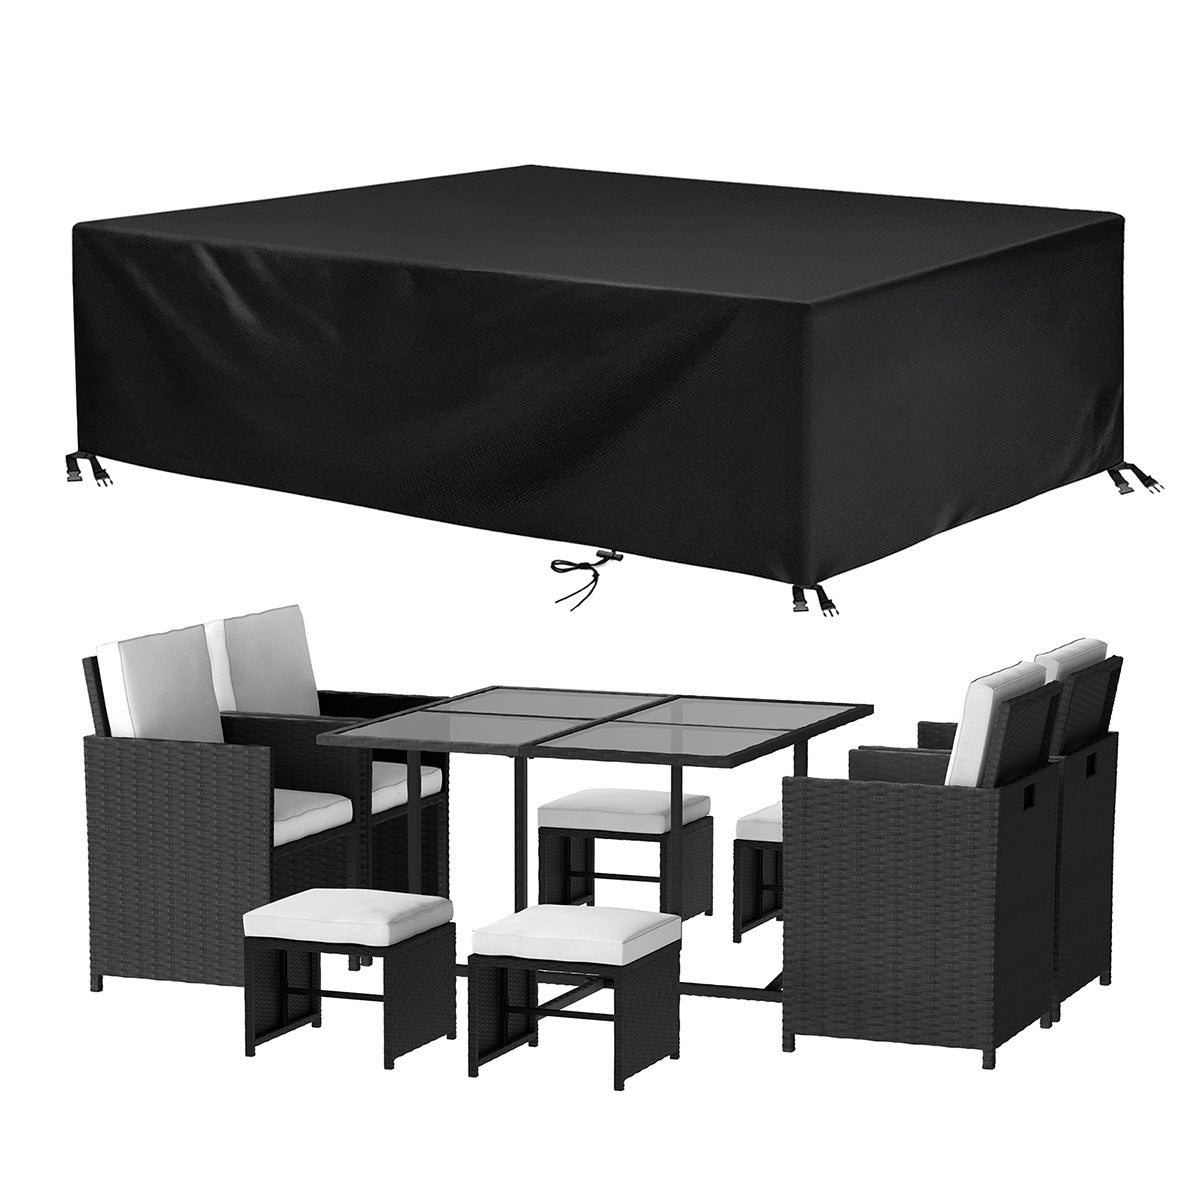 Image of 8 Seater Garden Furniture Rattan Cube Outdoor Dining Set, With Cover